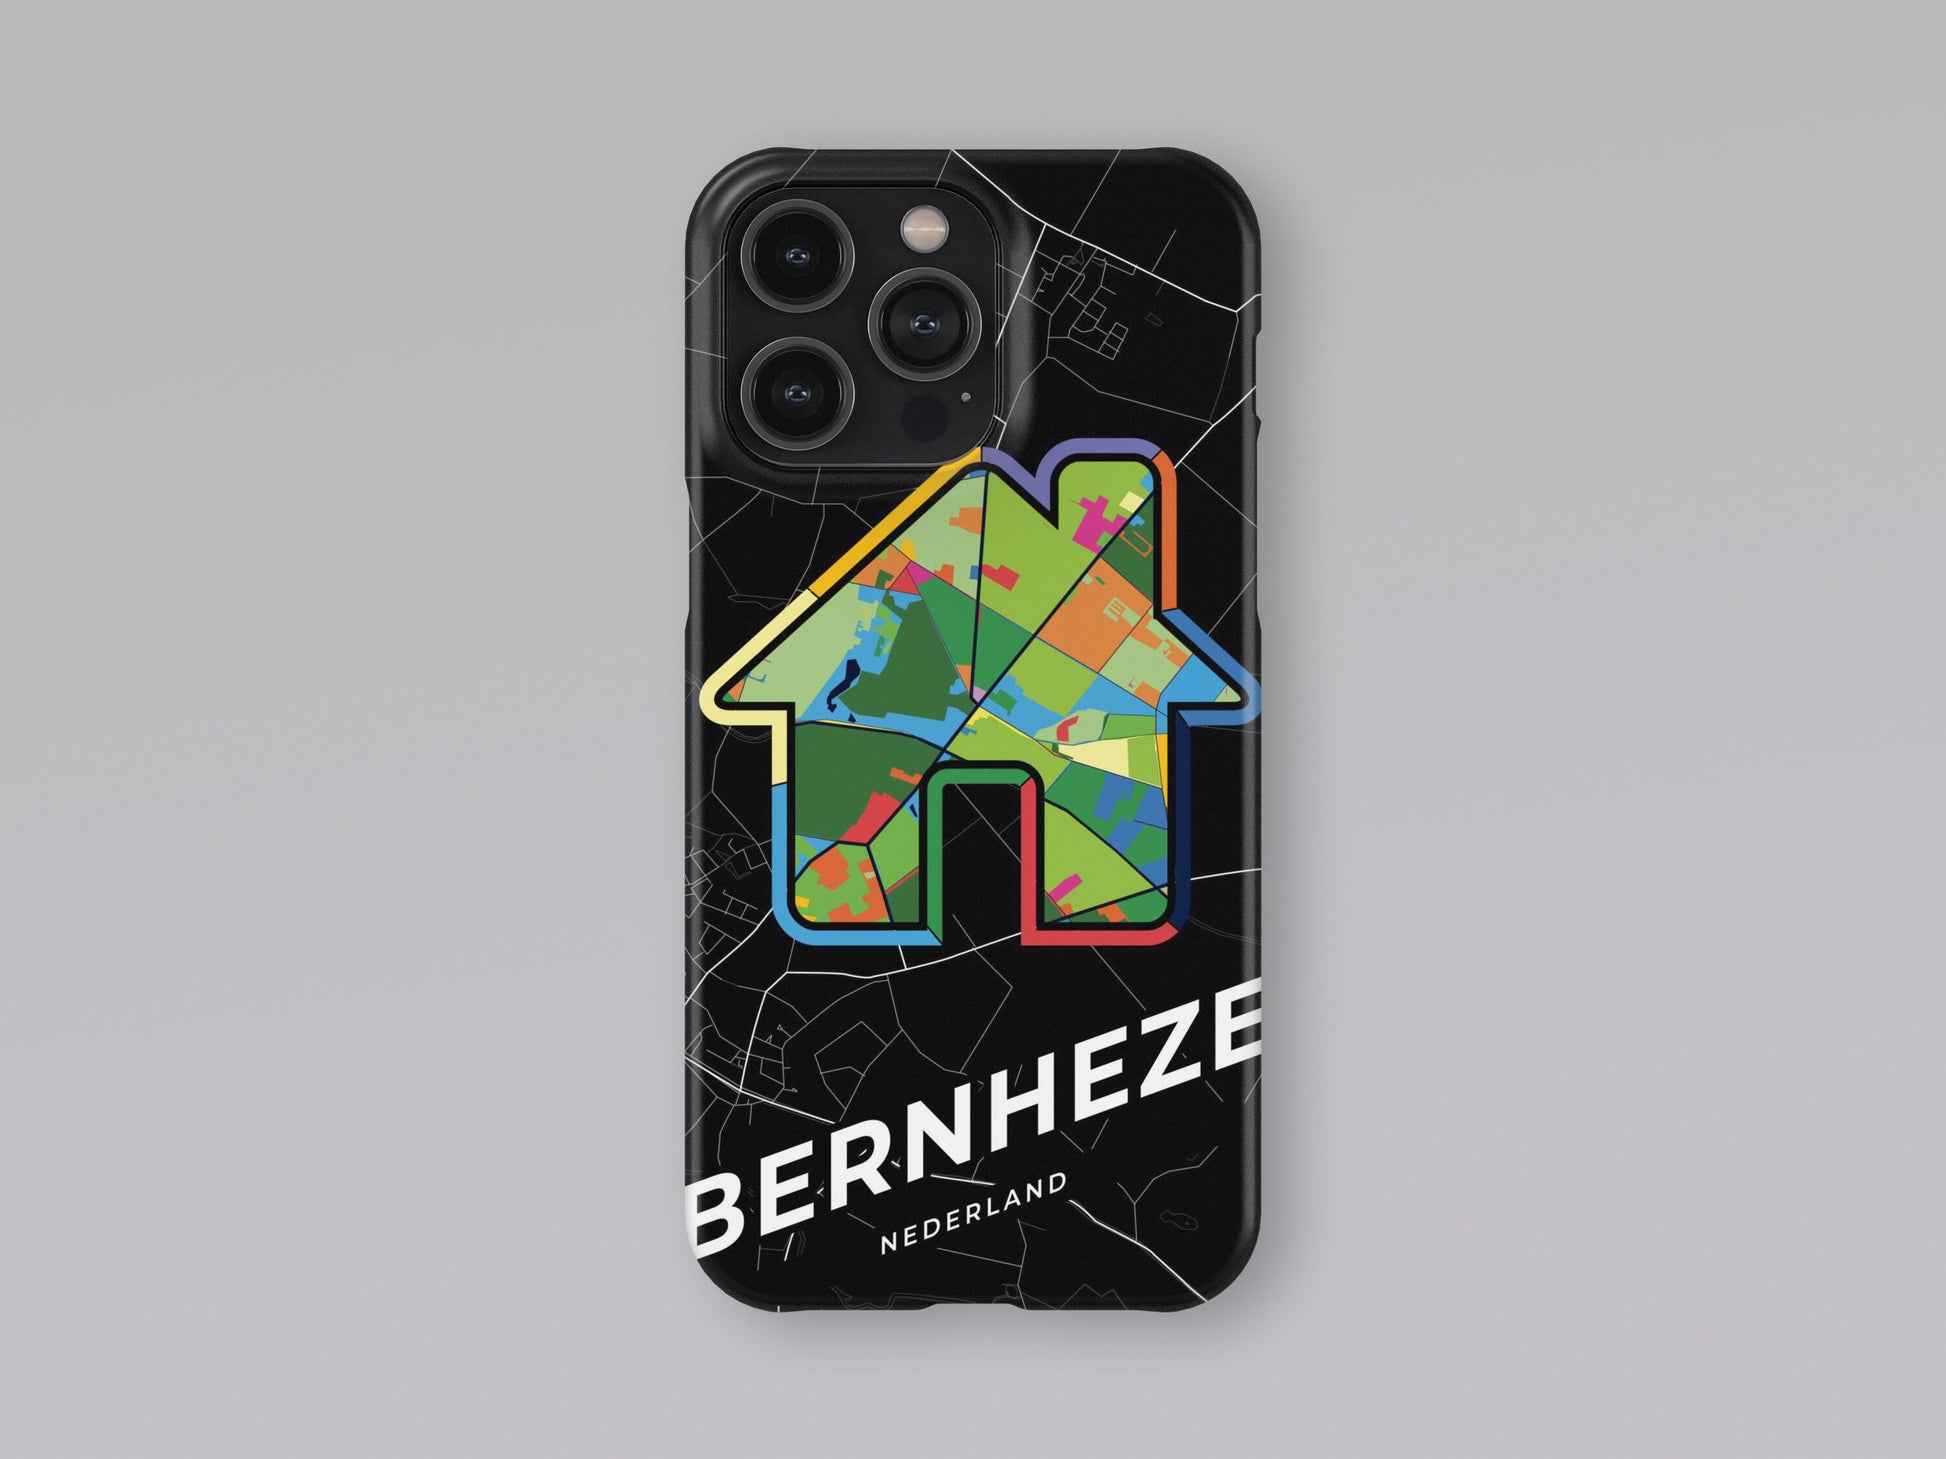 Bernheze Netherlands slim phone case with colorful icon. Birthday, wedding or housewarming gift. Couple match cases. 3